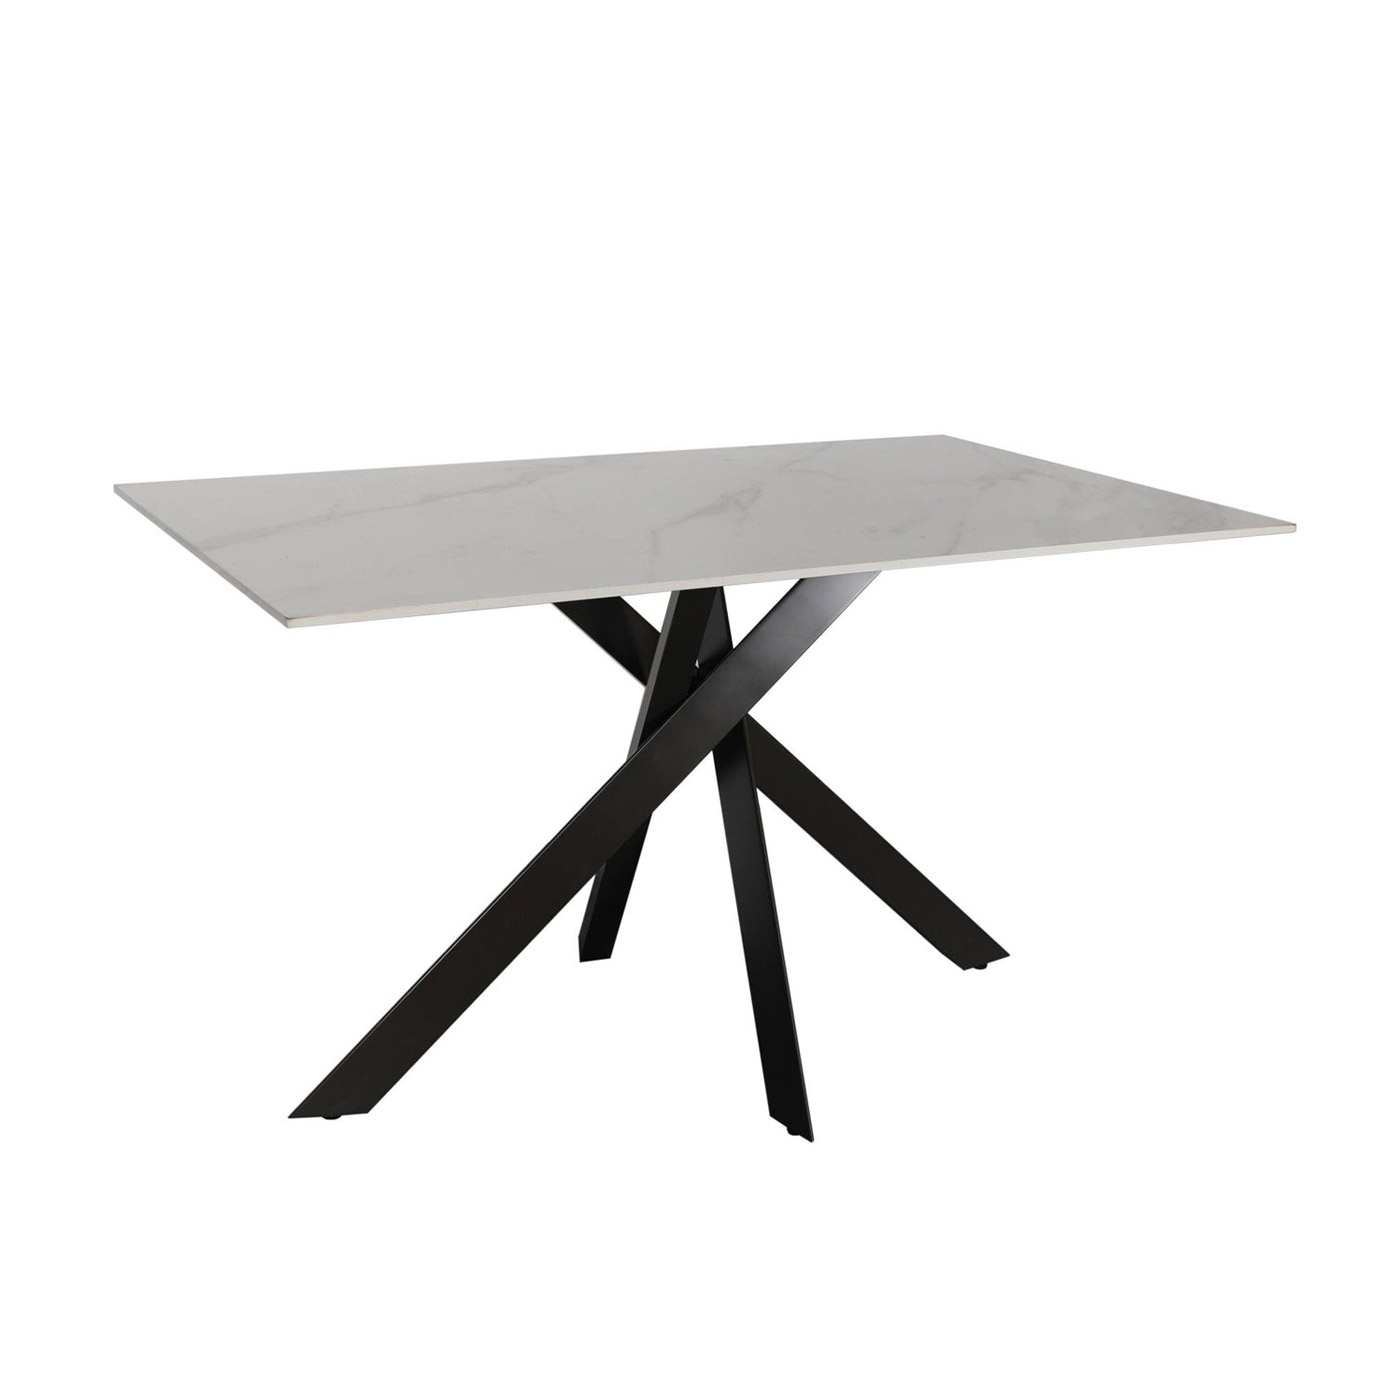 Shop Our Rectangular Dining Tables